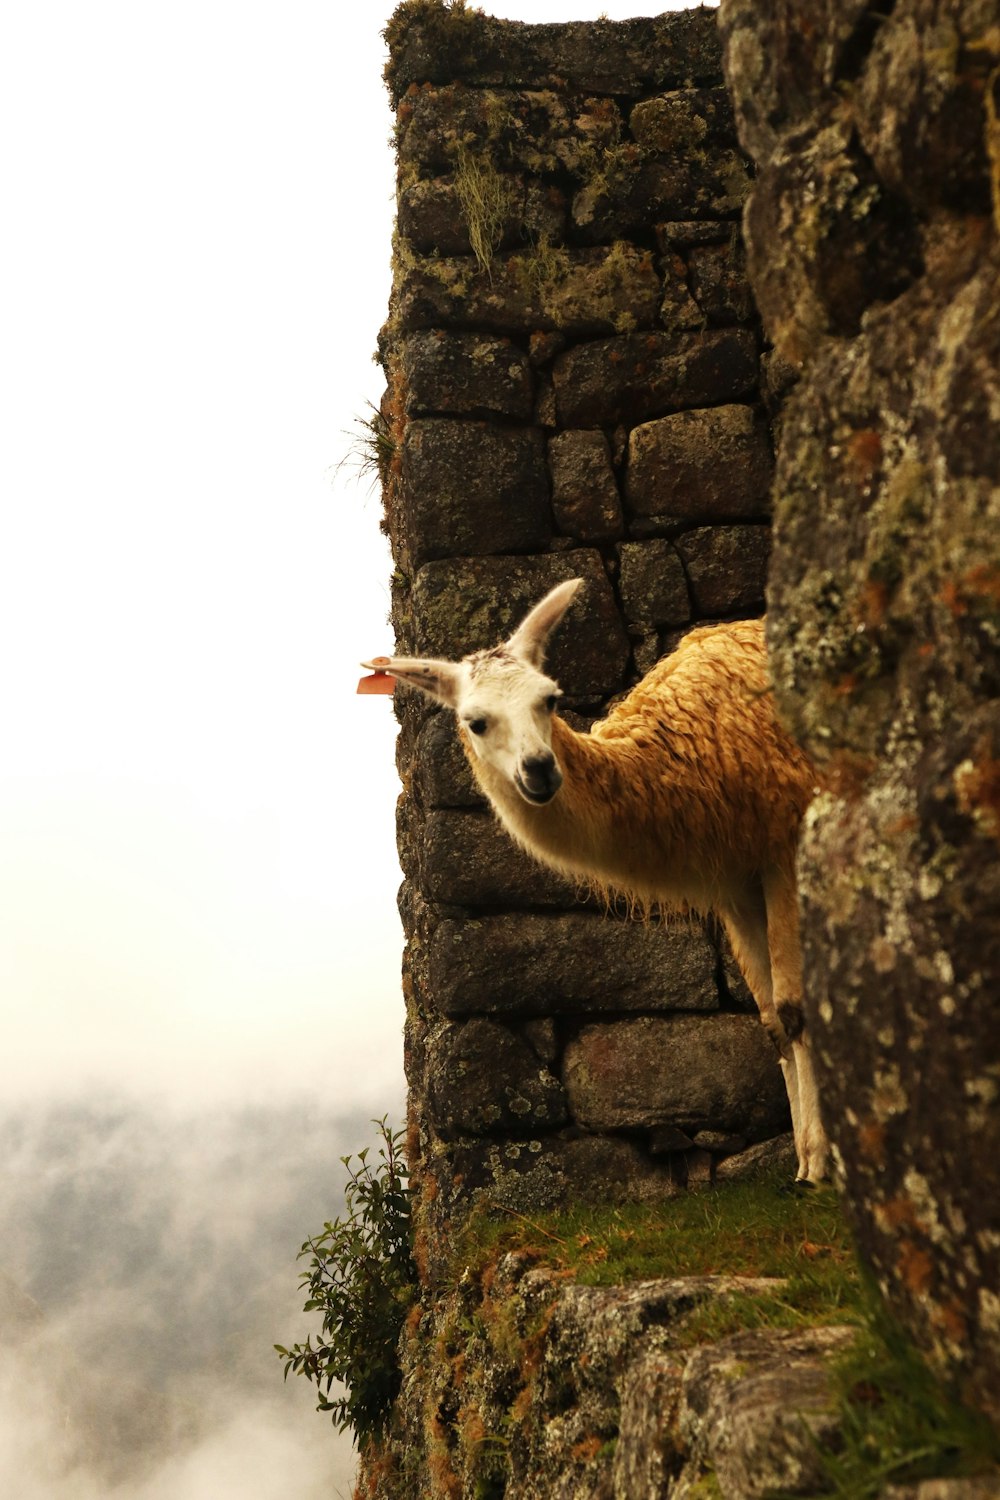 a llama standing on top of a stone wall